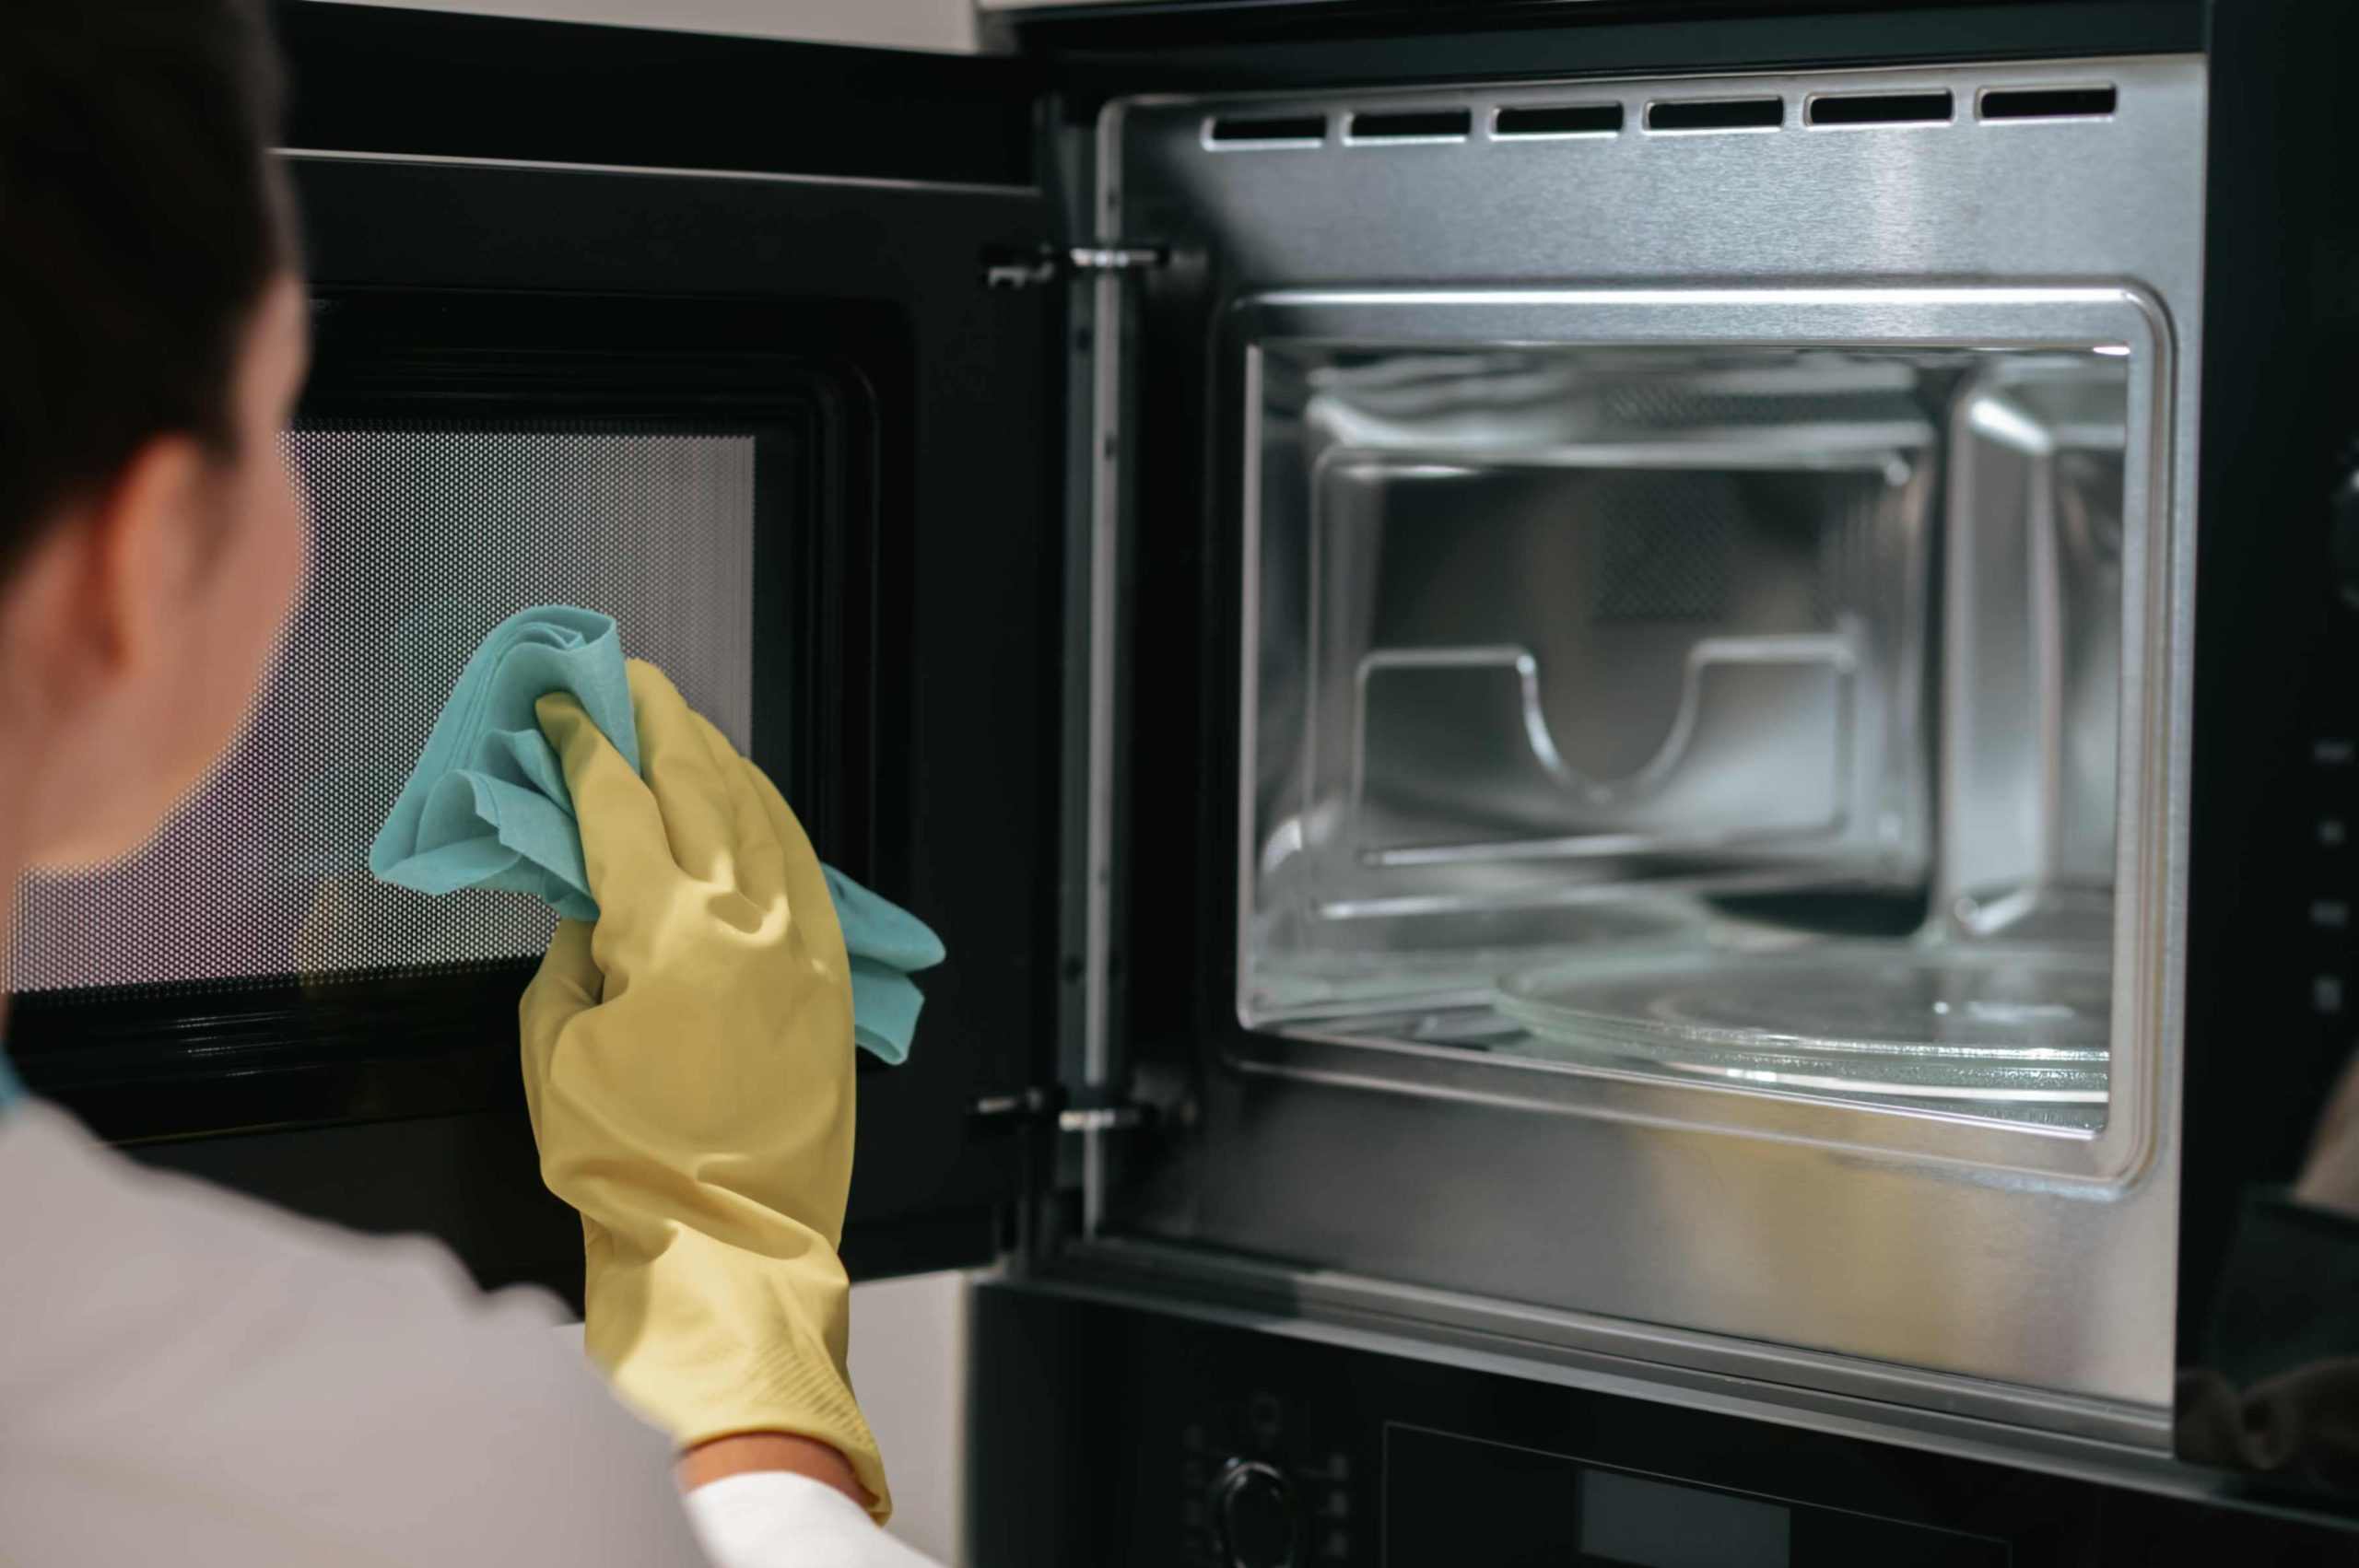 Microwave Guide 101: Troubleshooting Common Problems & Essential Maintenance Tips